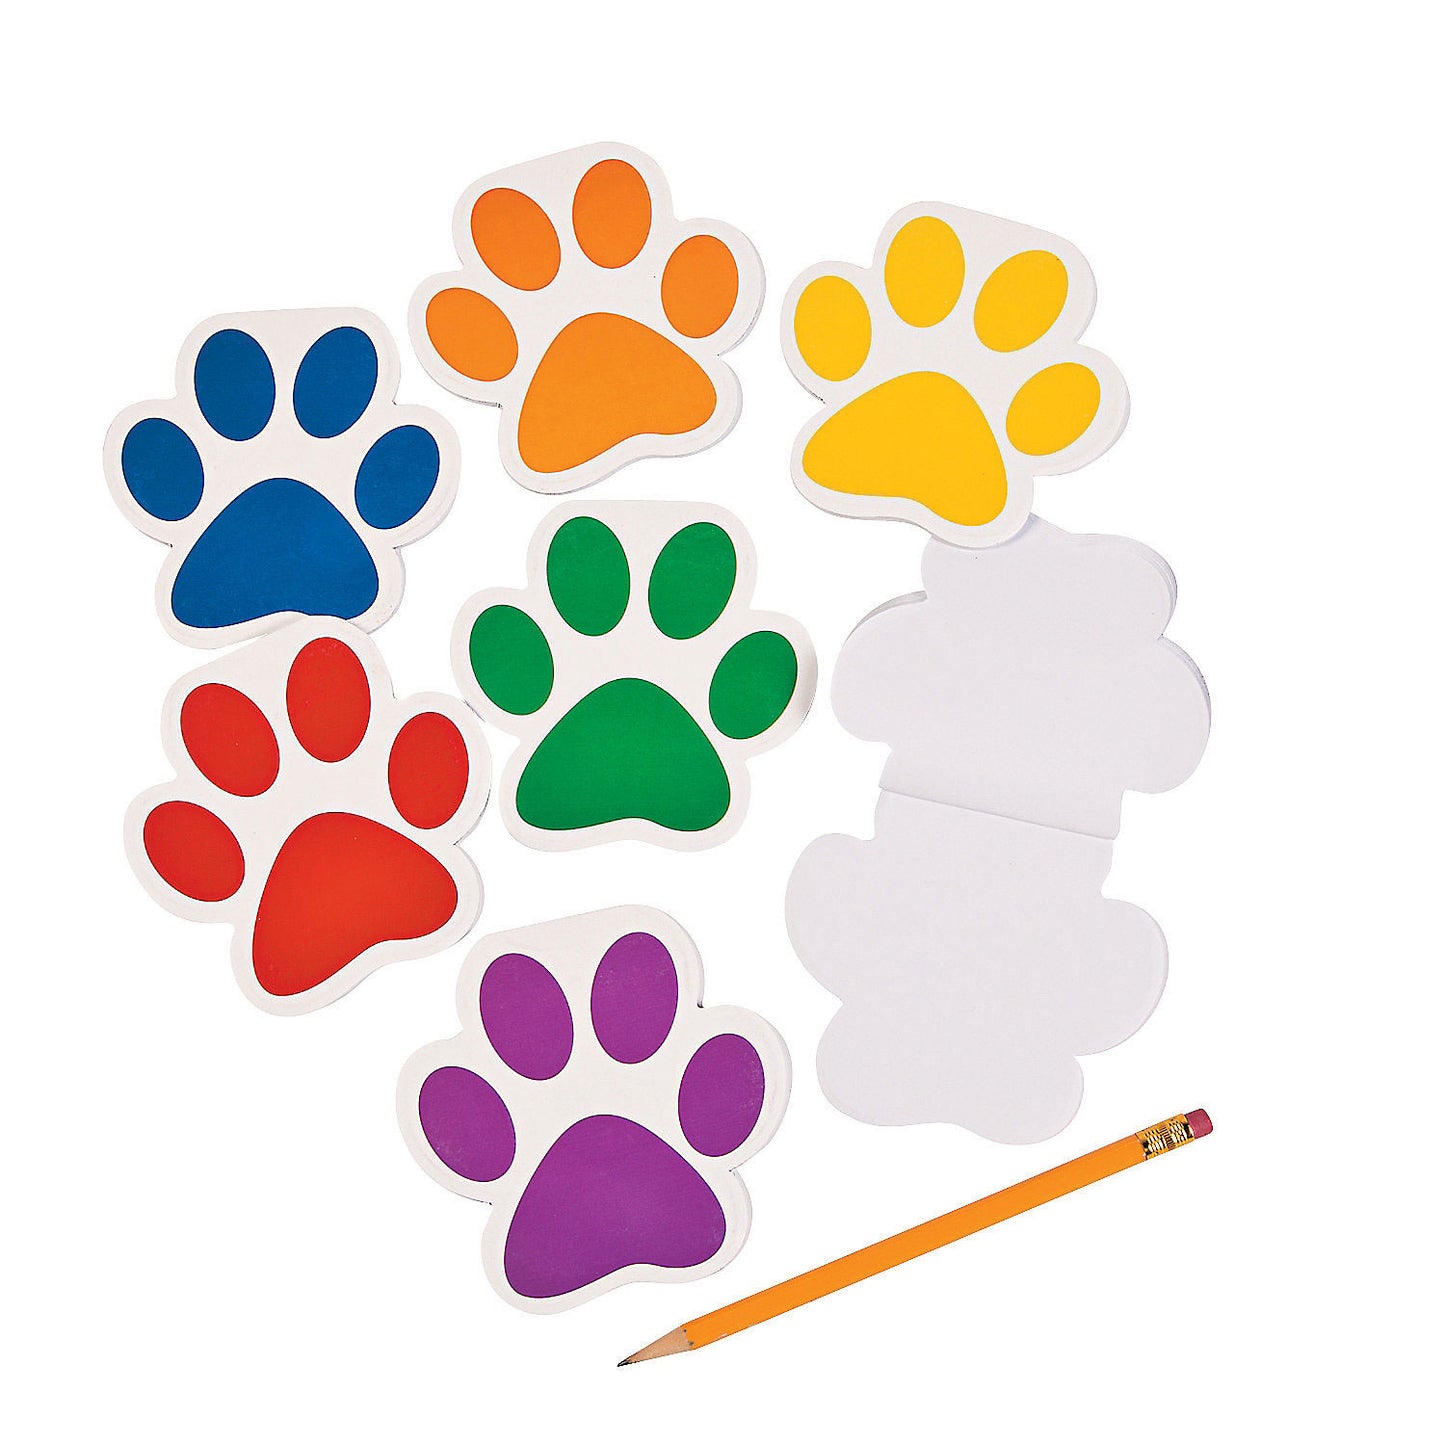 Make every note-taking experience paw-some with our Paw Print Note Pad! This cute and lovely note pad features a playful paw print design that's perfect for animal lovers of all ages.